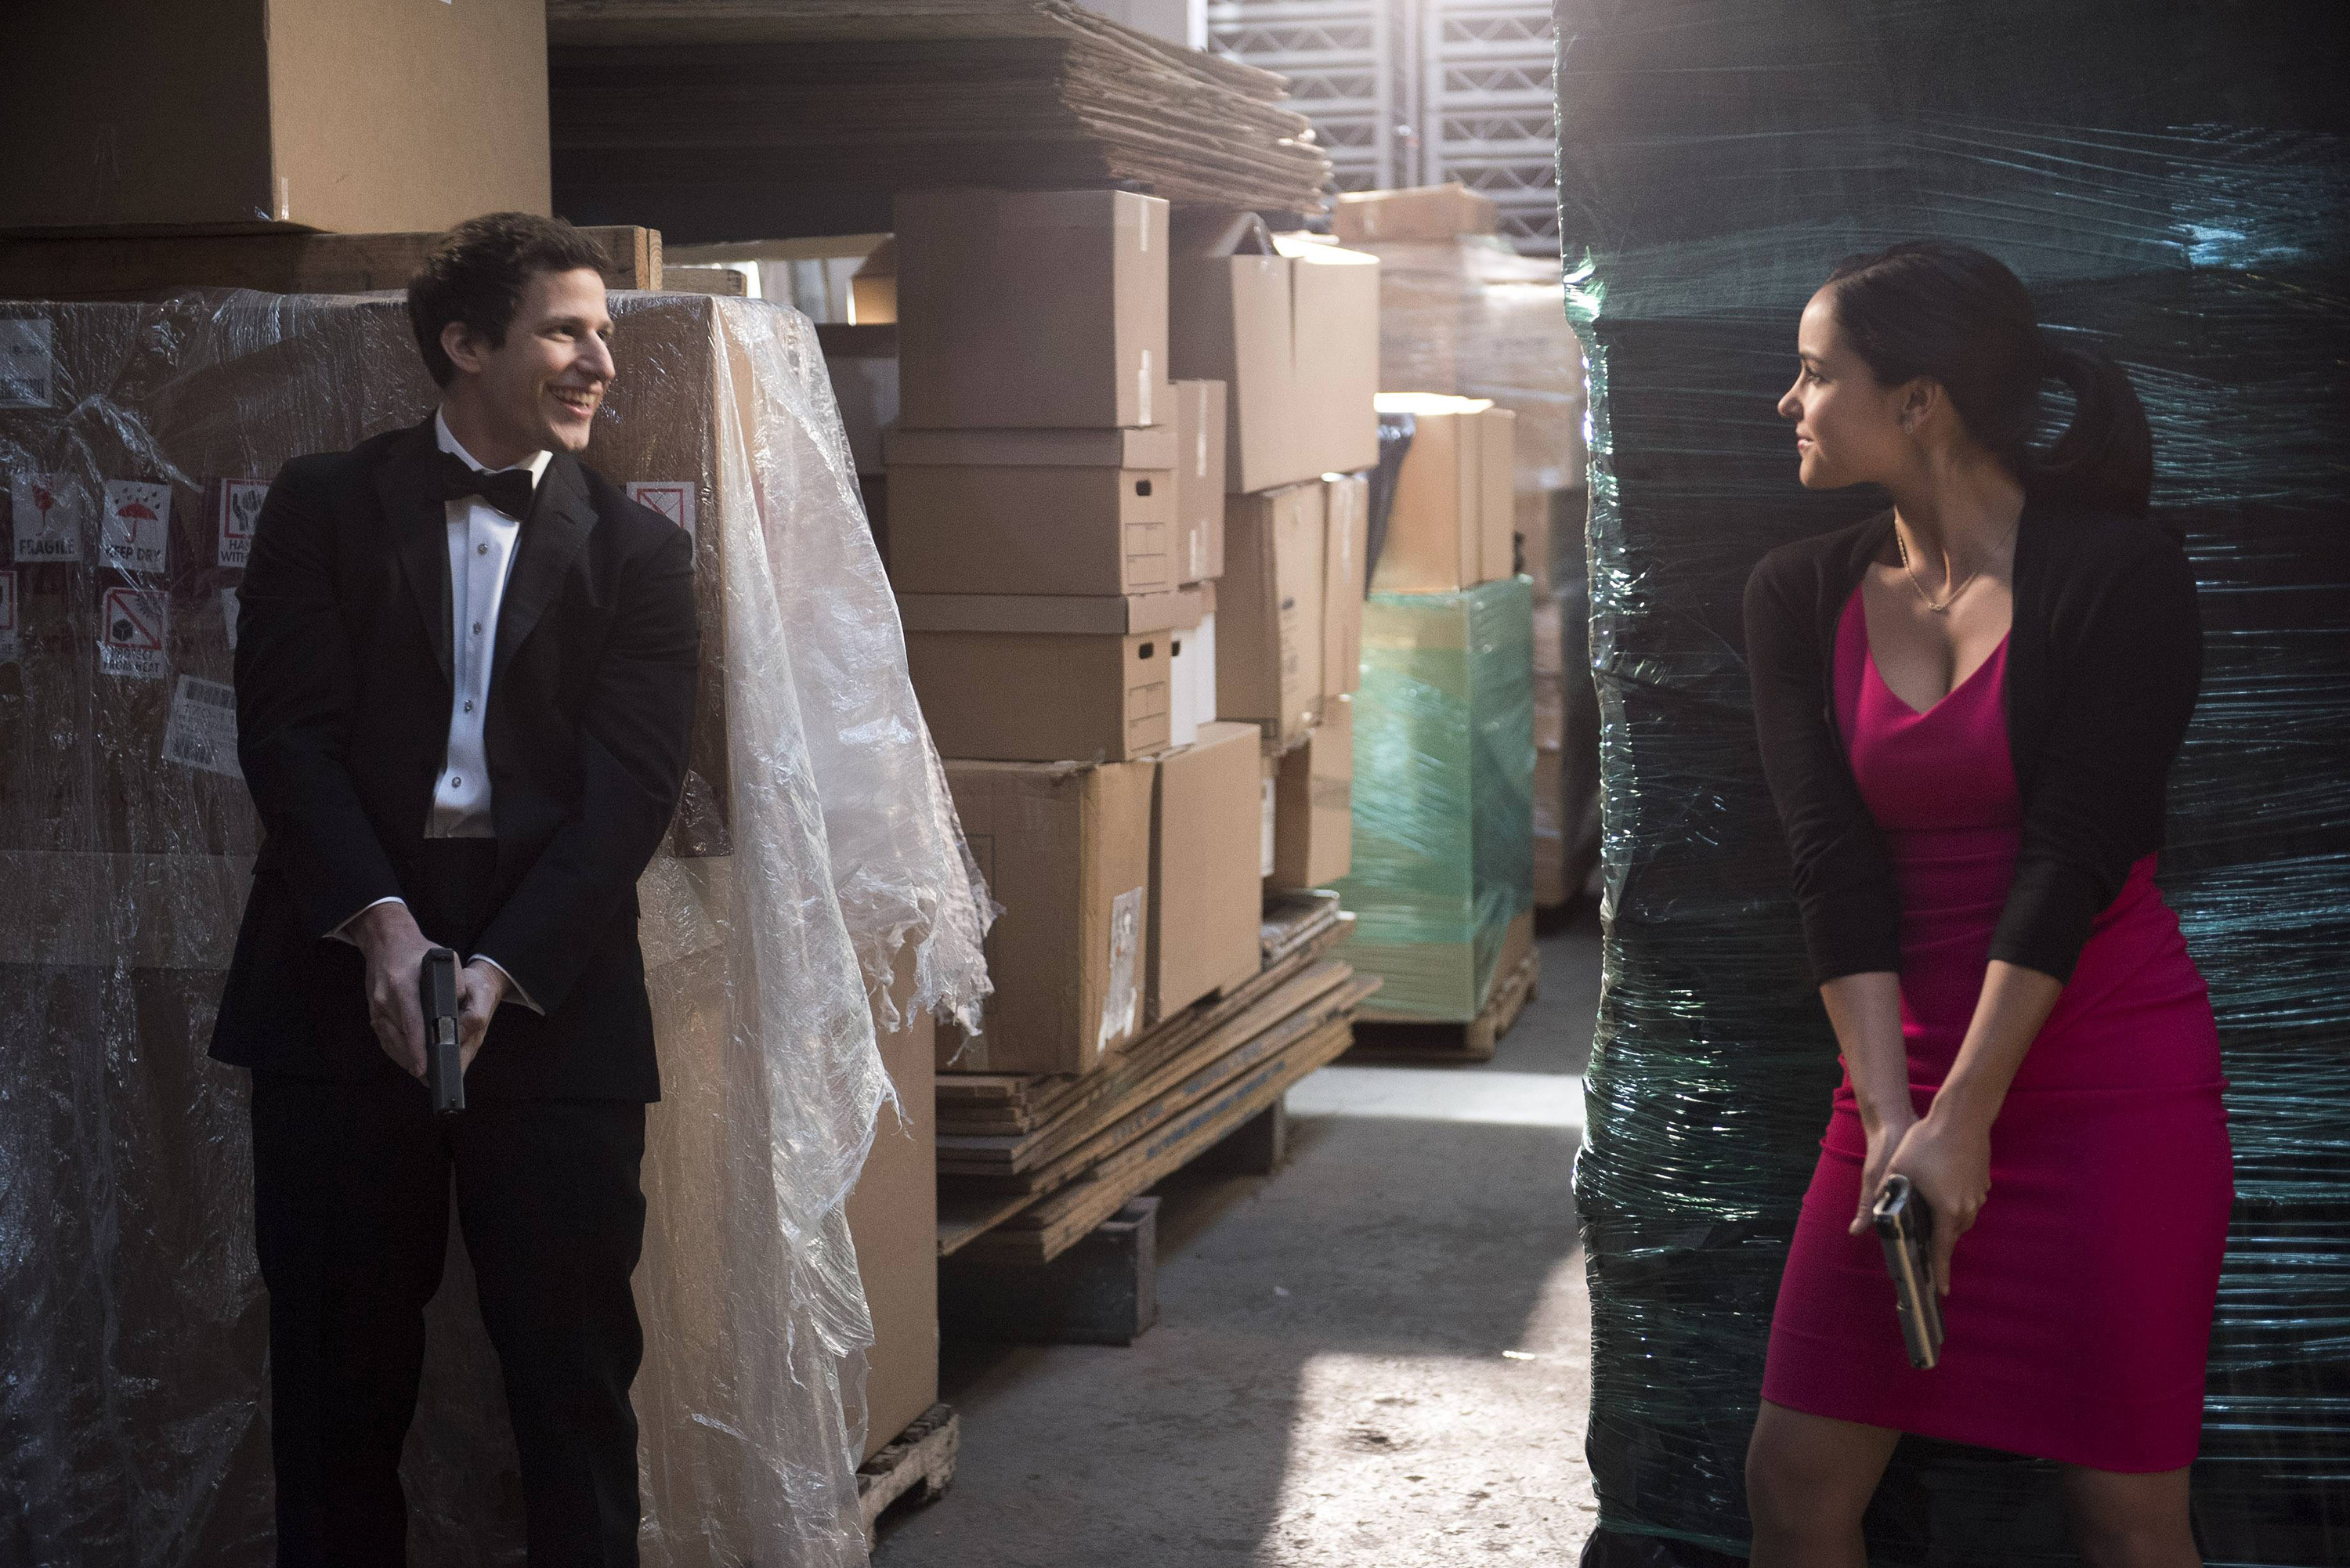 Andy Samberg and Melissa Fumero, dressed in fancy wedding clothes, hide in a warehouse with their guns drawn